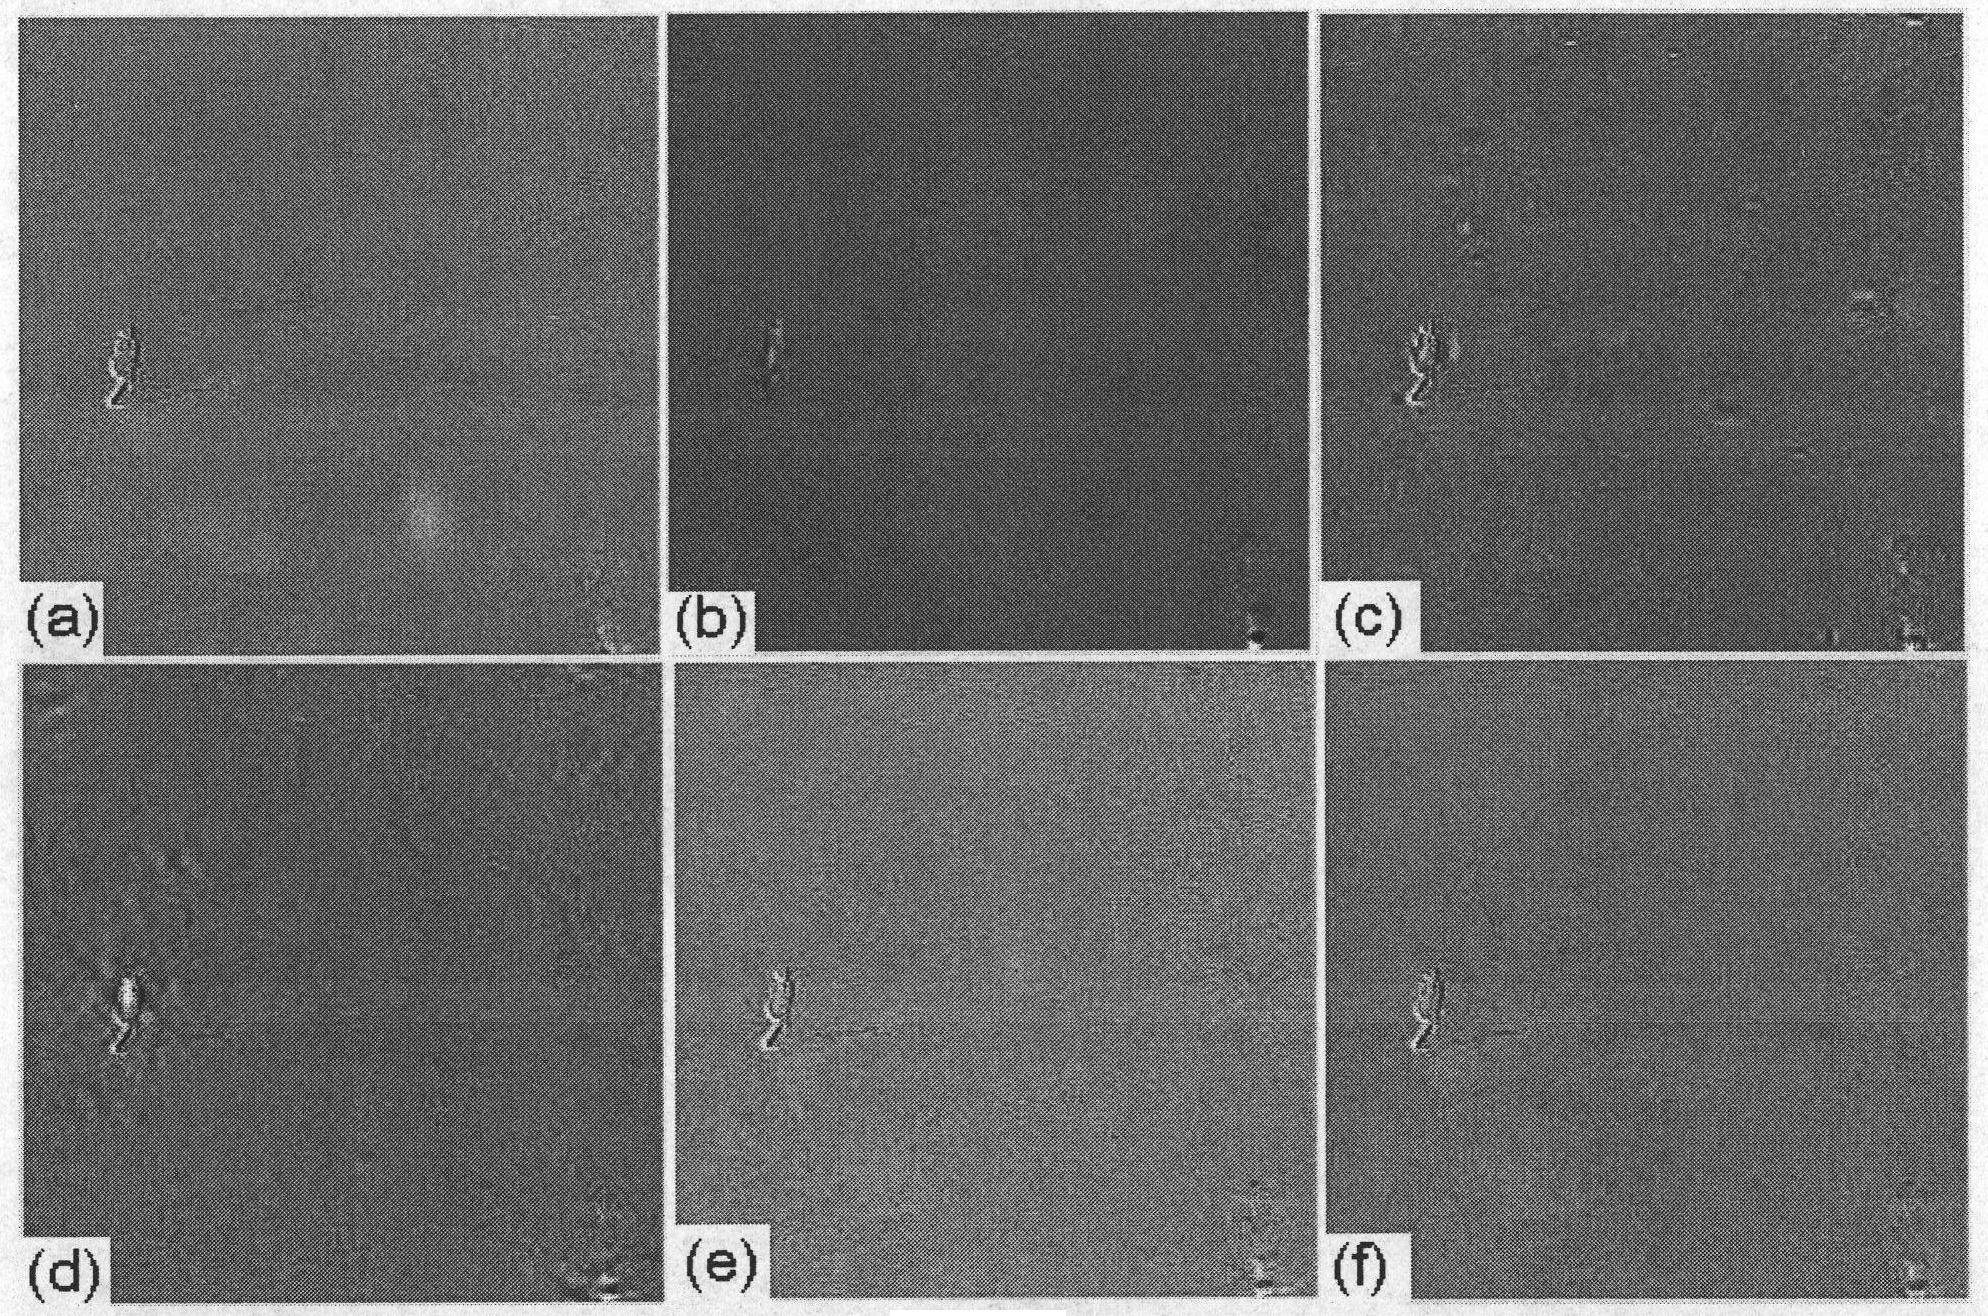 Infrared and visible light video image fusion method based on Surfacelet conversion